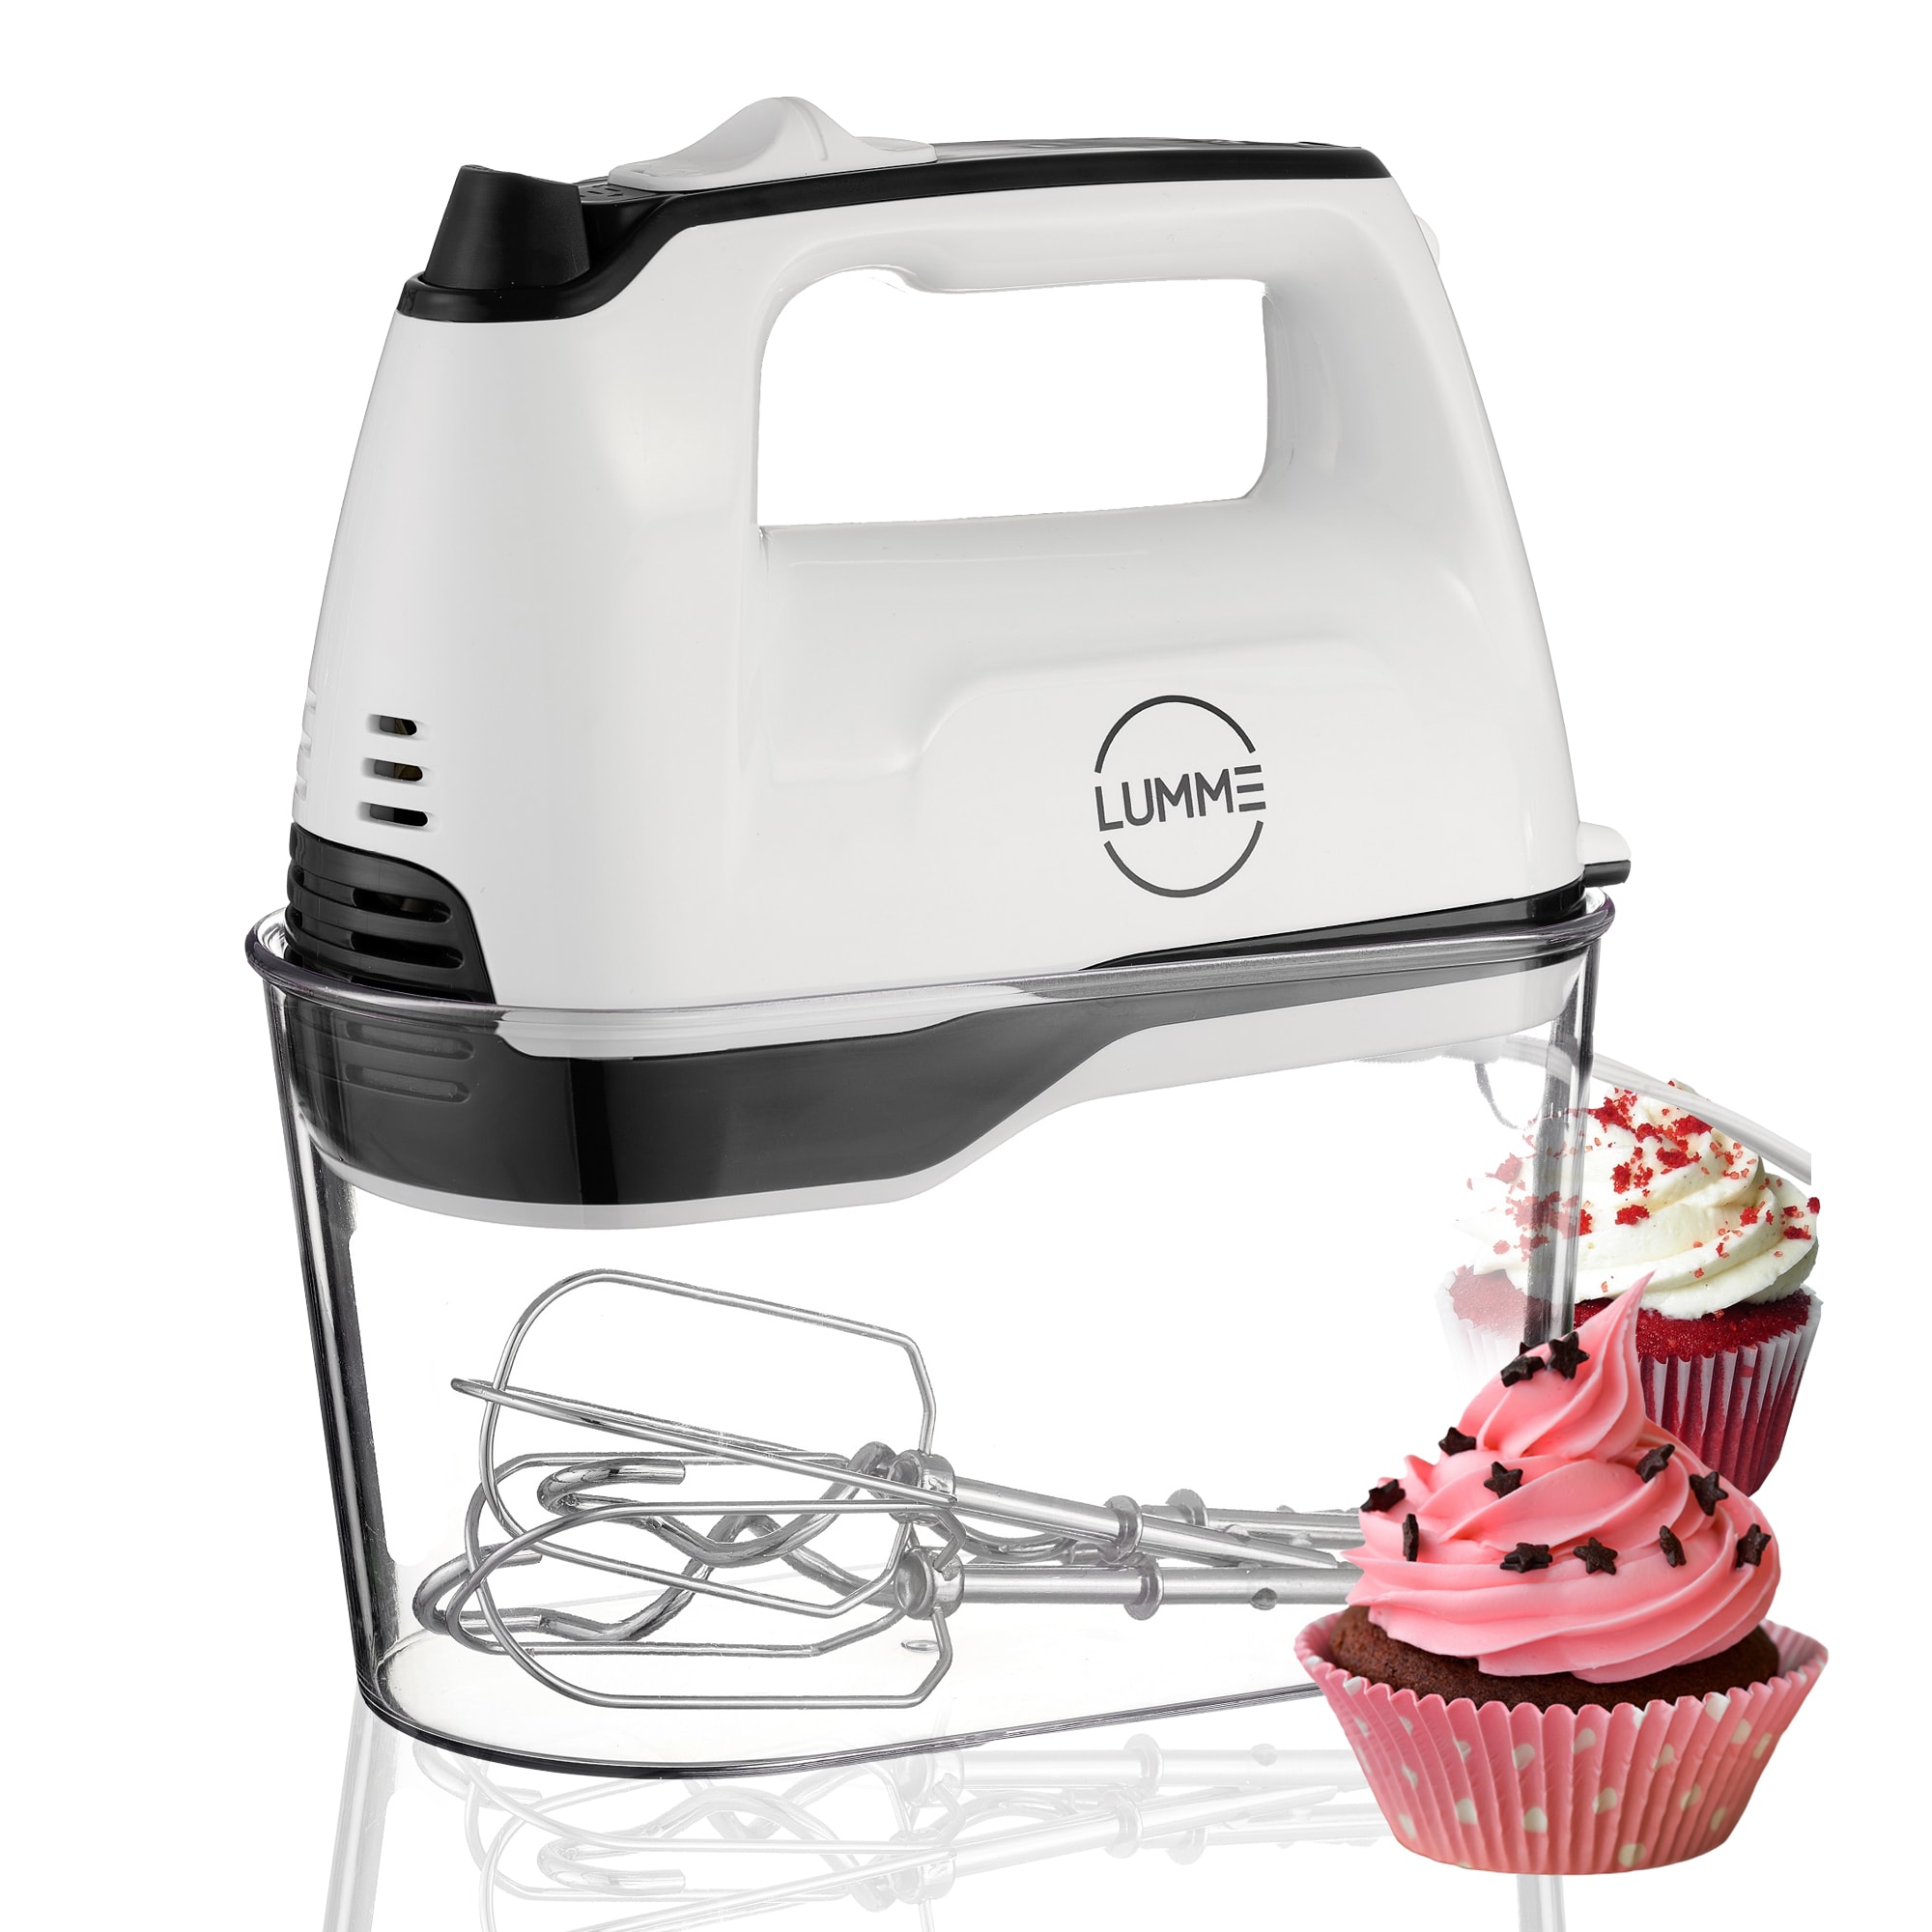 This Intuitive Hand Mixer Practically Does the Baking for You